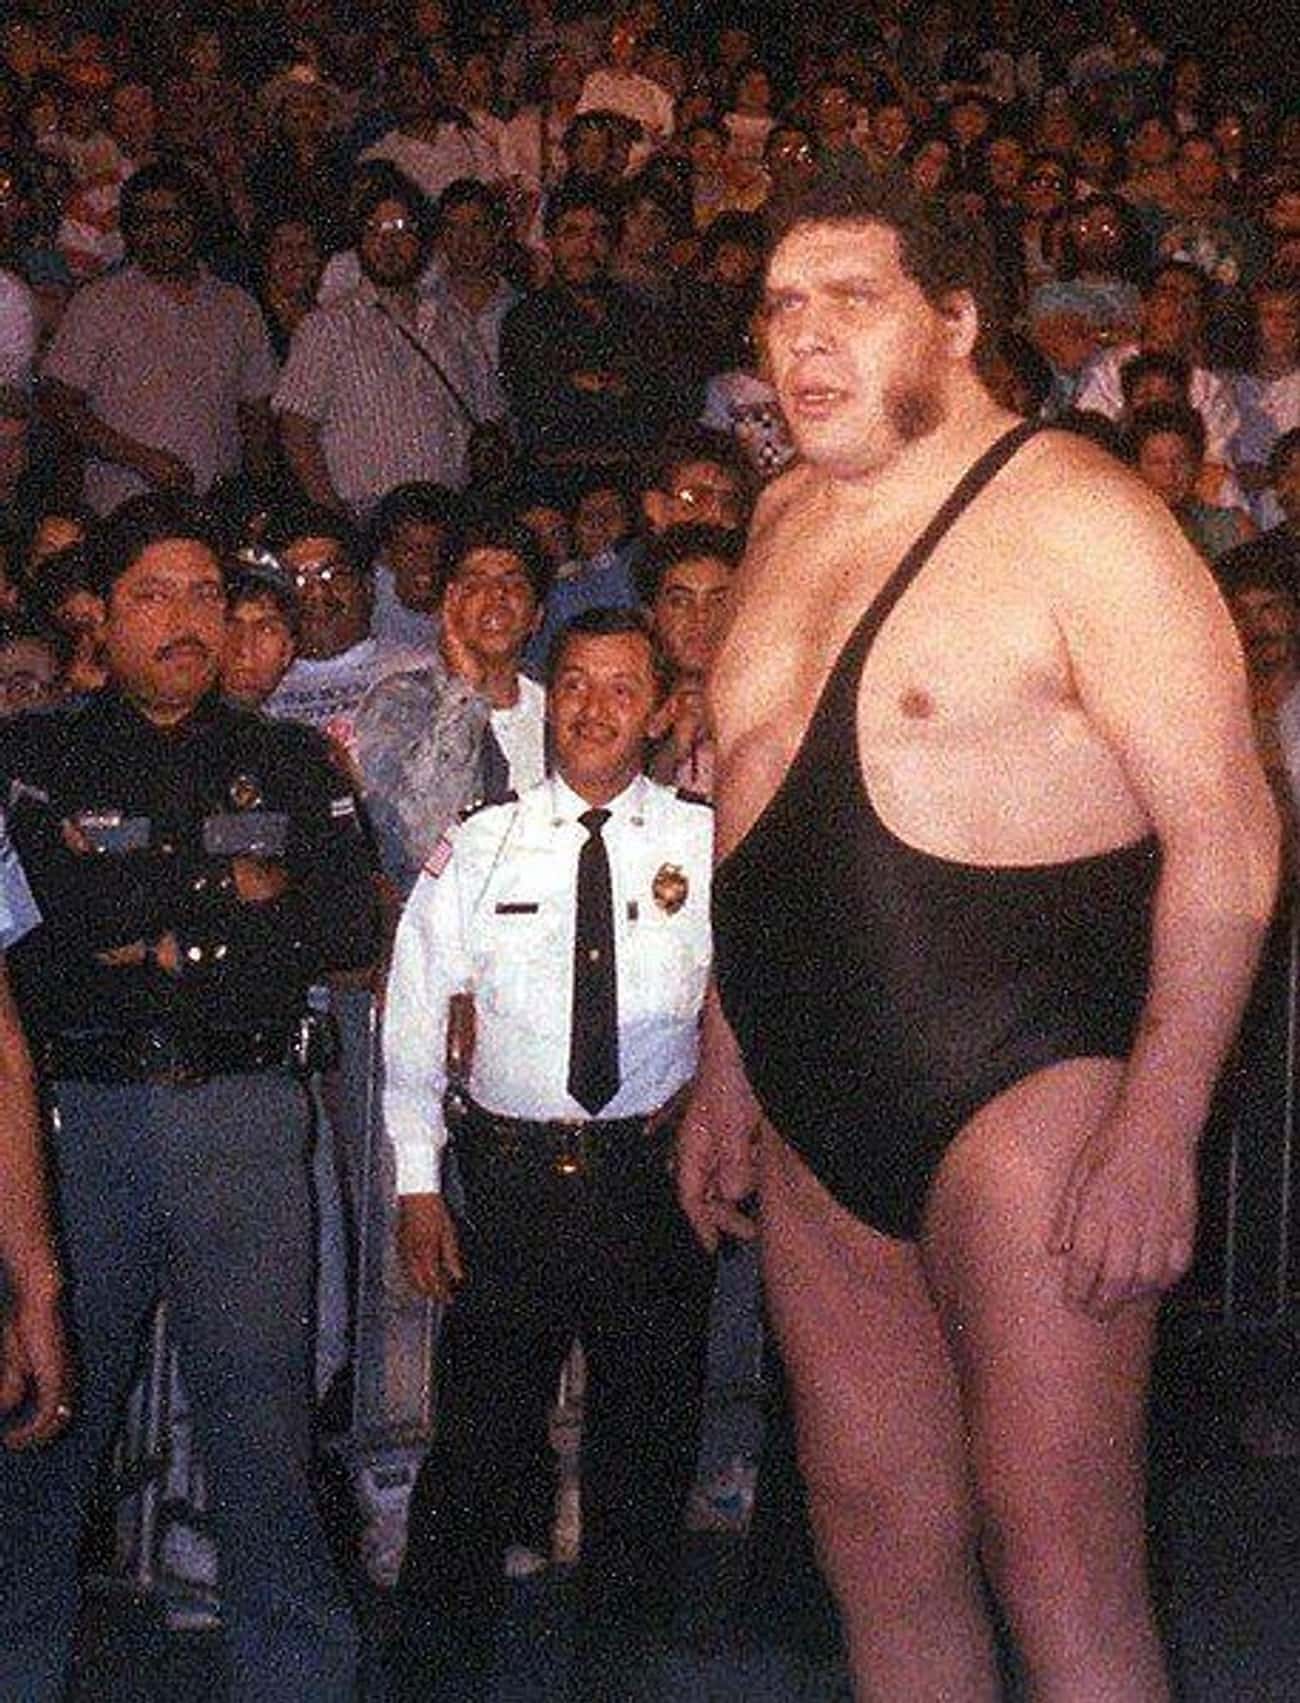 André the Giant Wore His Cross-Body Singlet Because He Had Back Problems